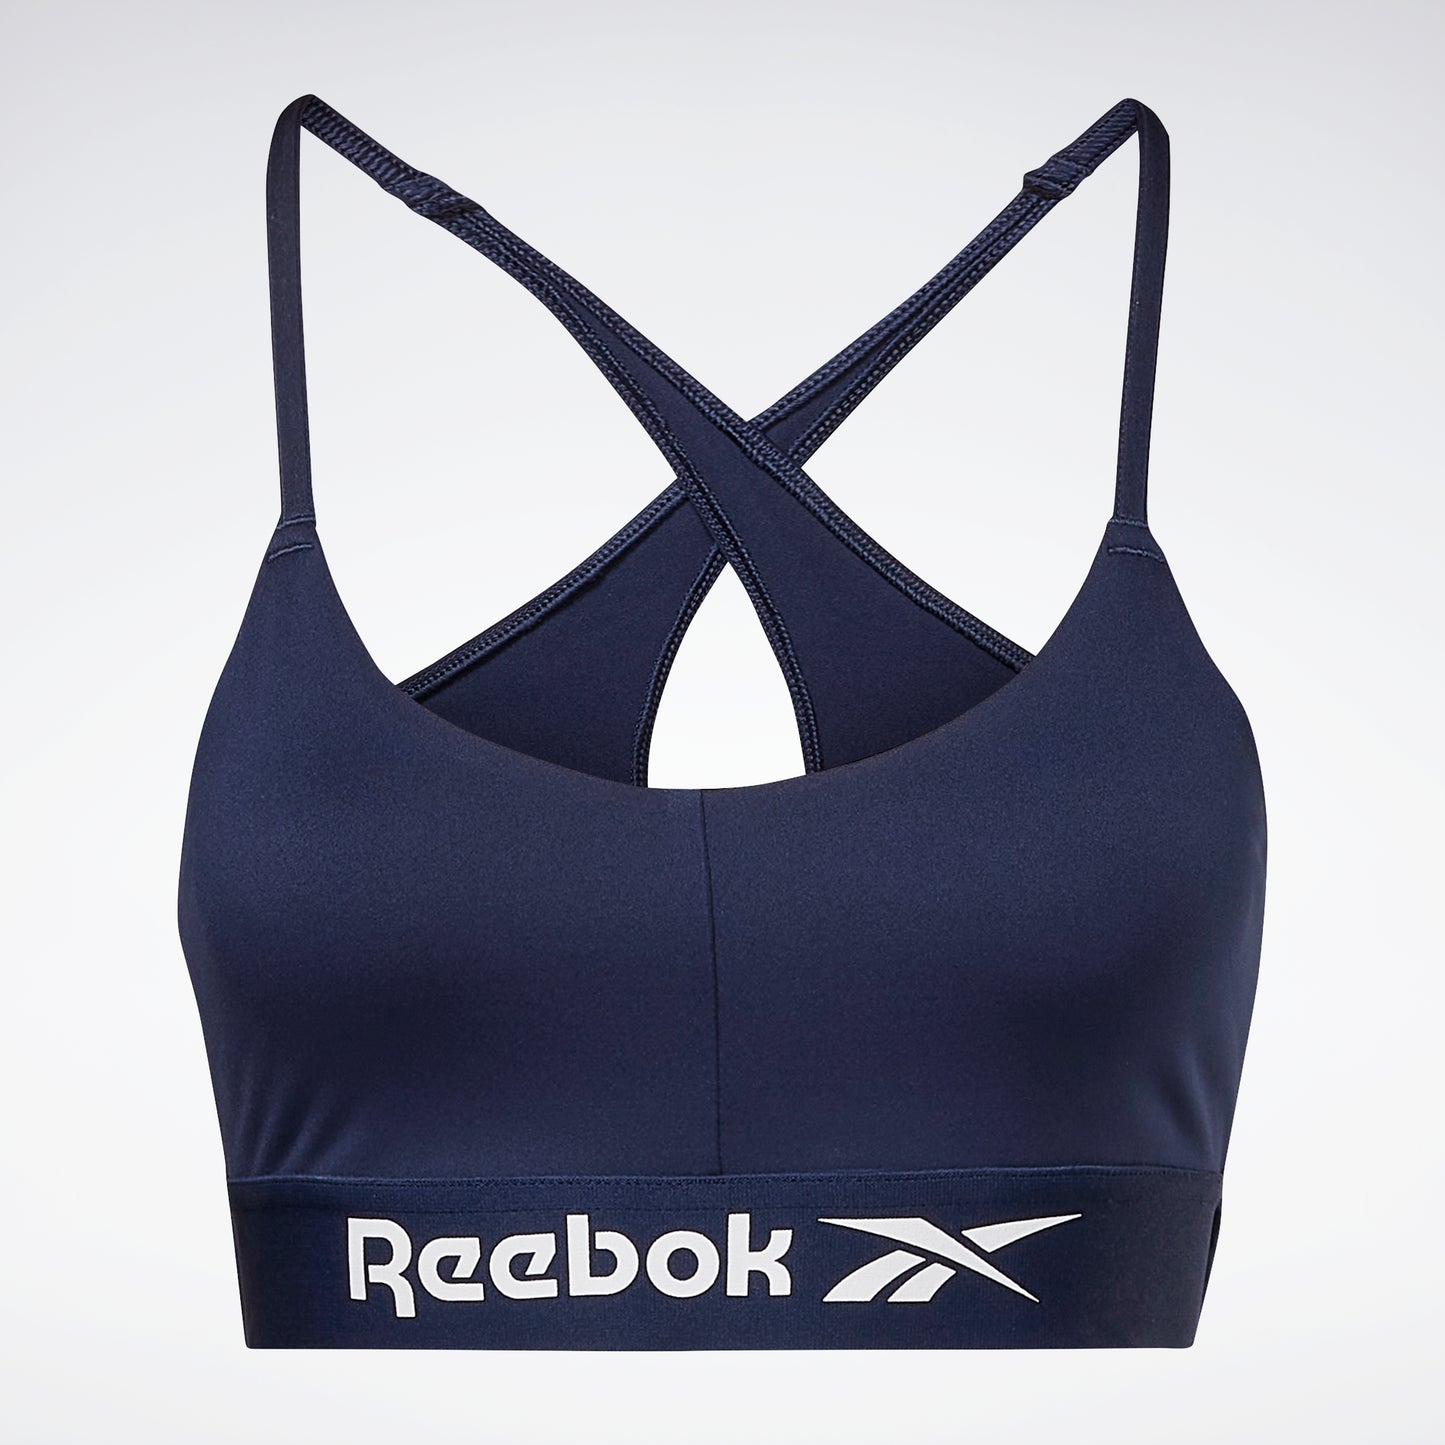 Reebok Puremove Sports Bra-Small #FPG711, Teal Bright Colors Extreme  Support